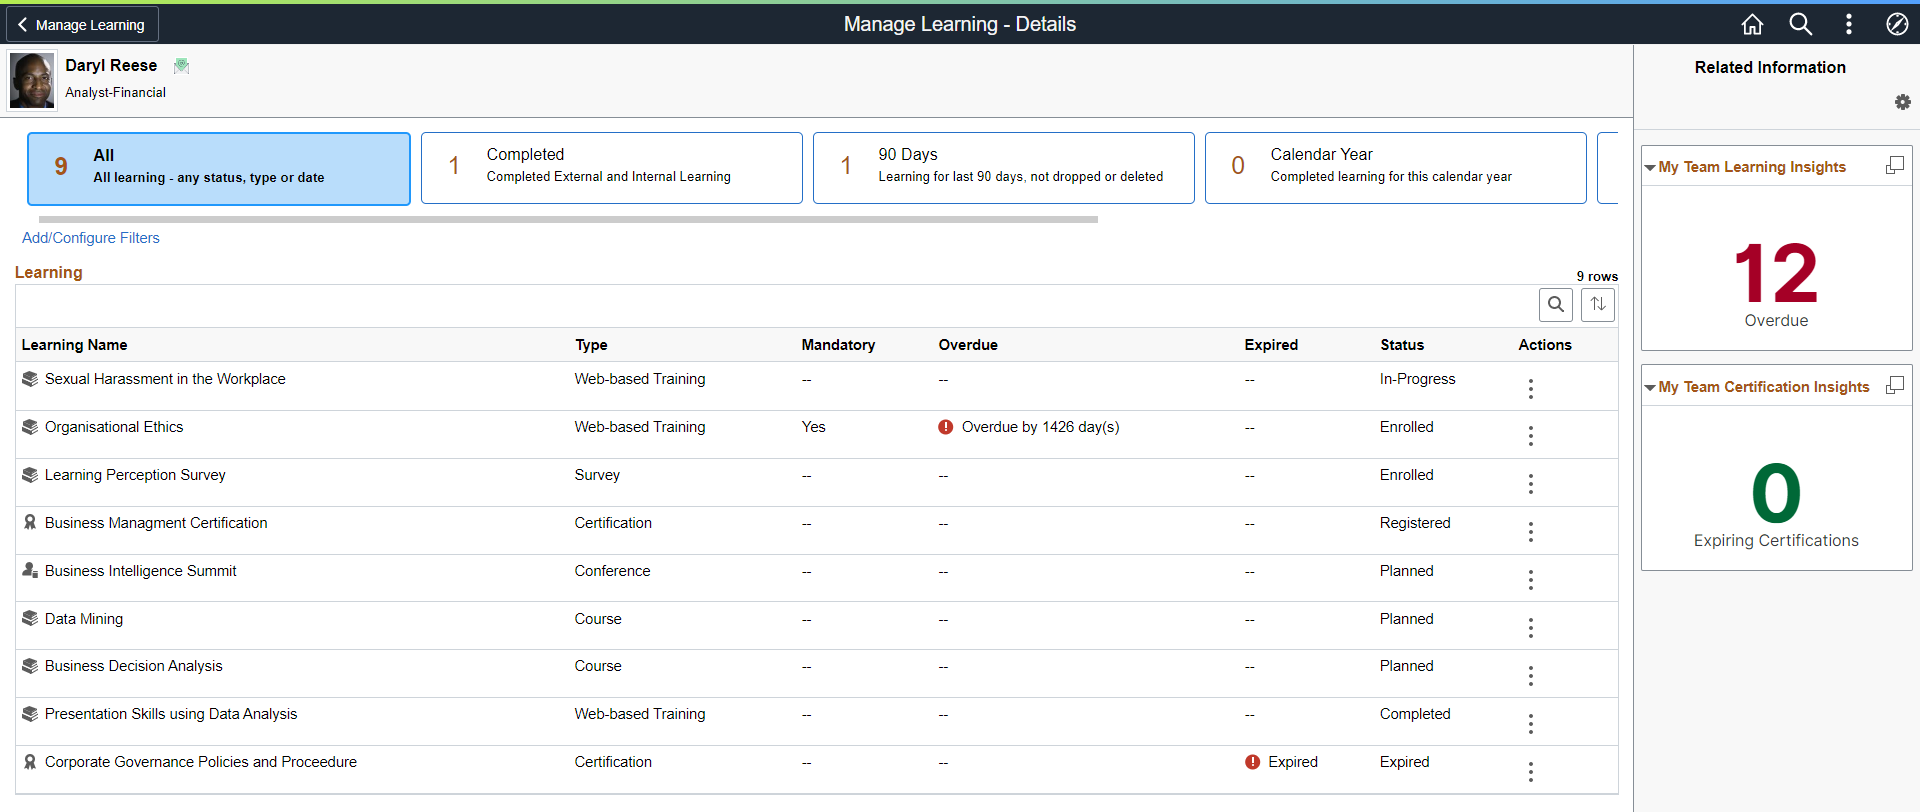 Manage Learning - Details Page